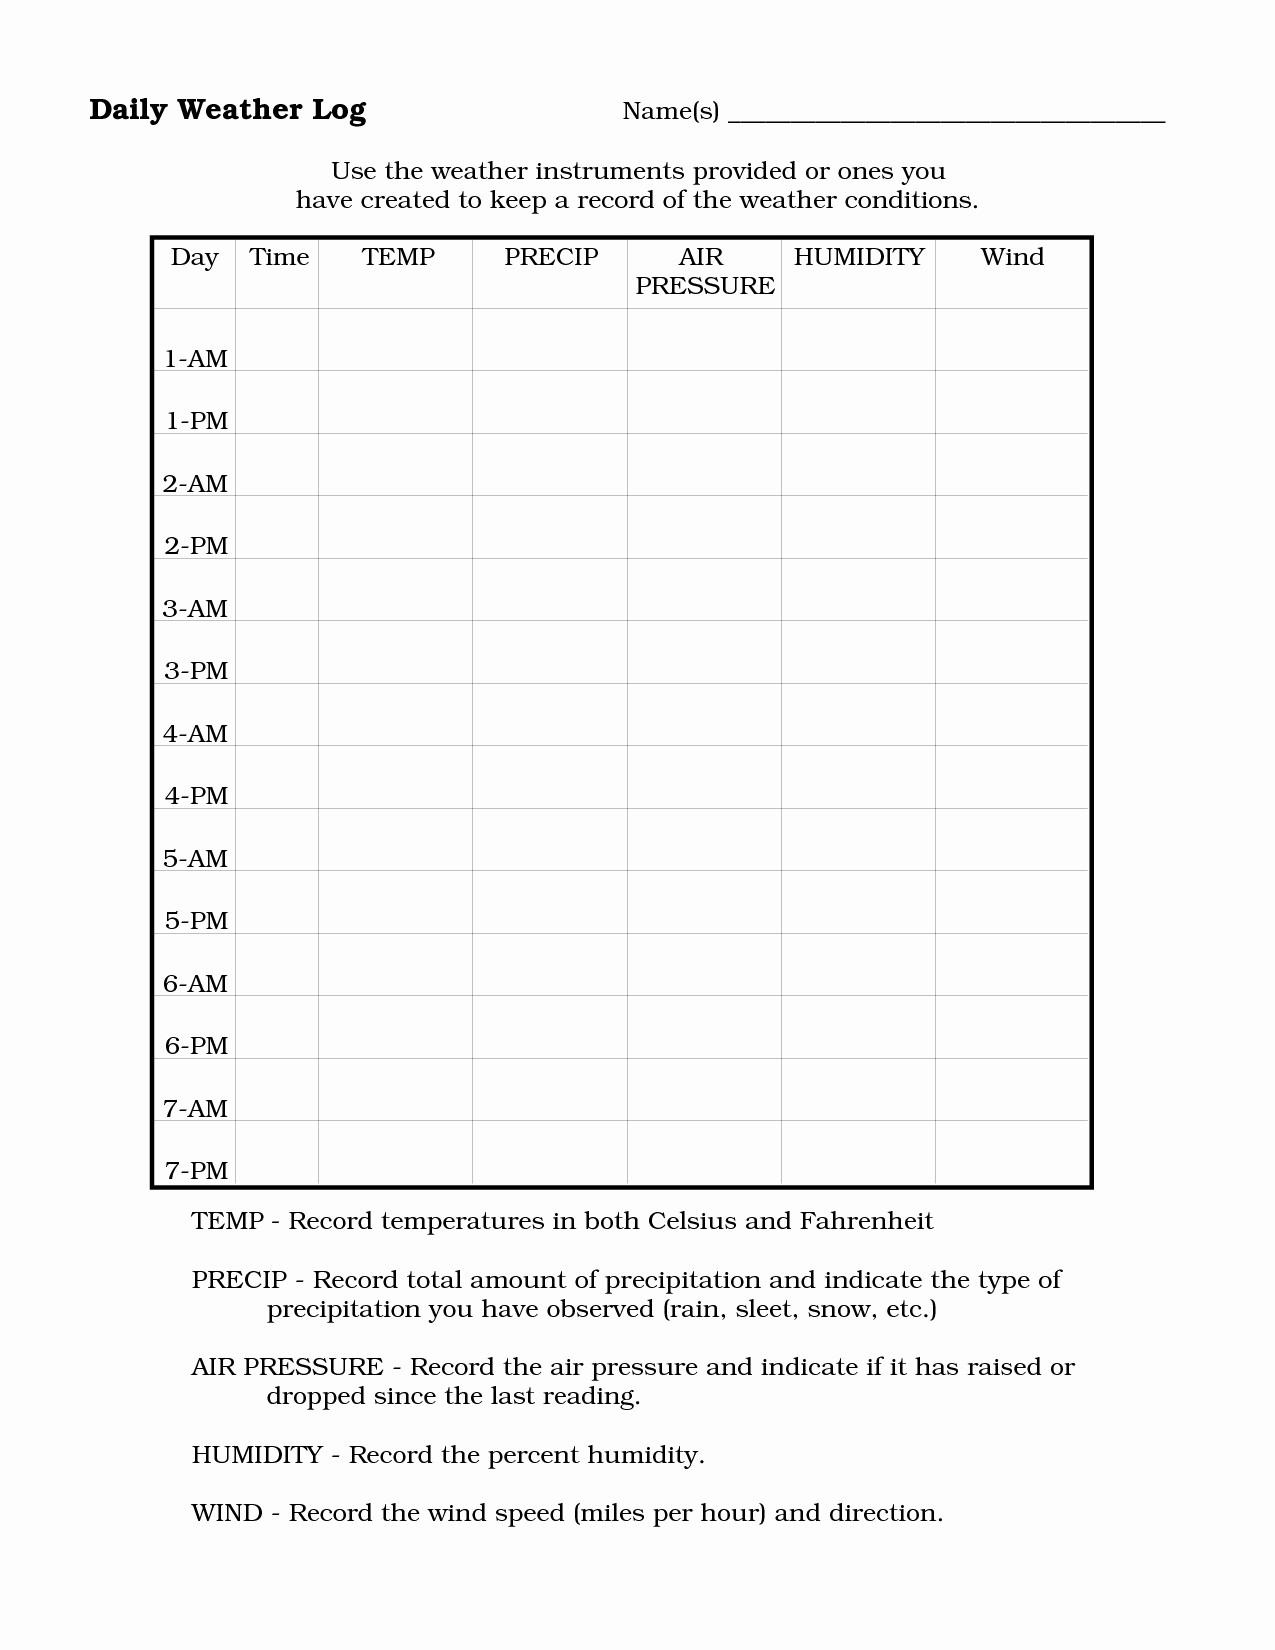 Weather tools Worksheet Lovely 10 Best Of Weather Instruments Worksheets Printable